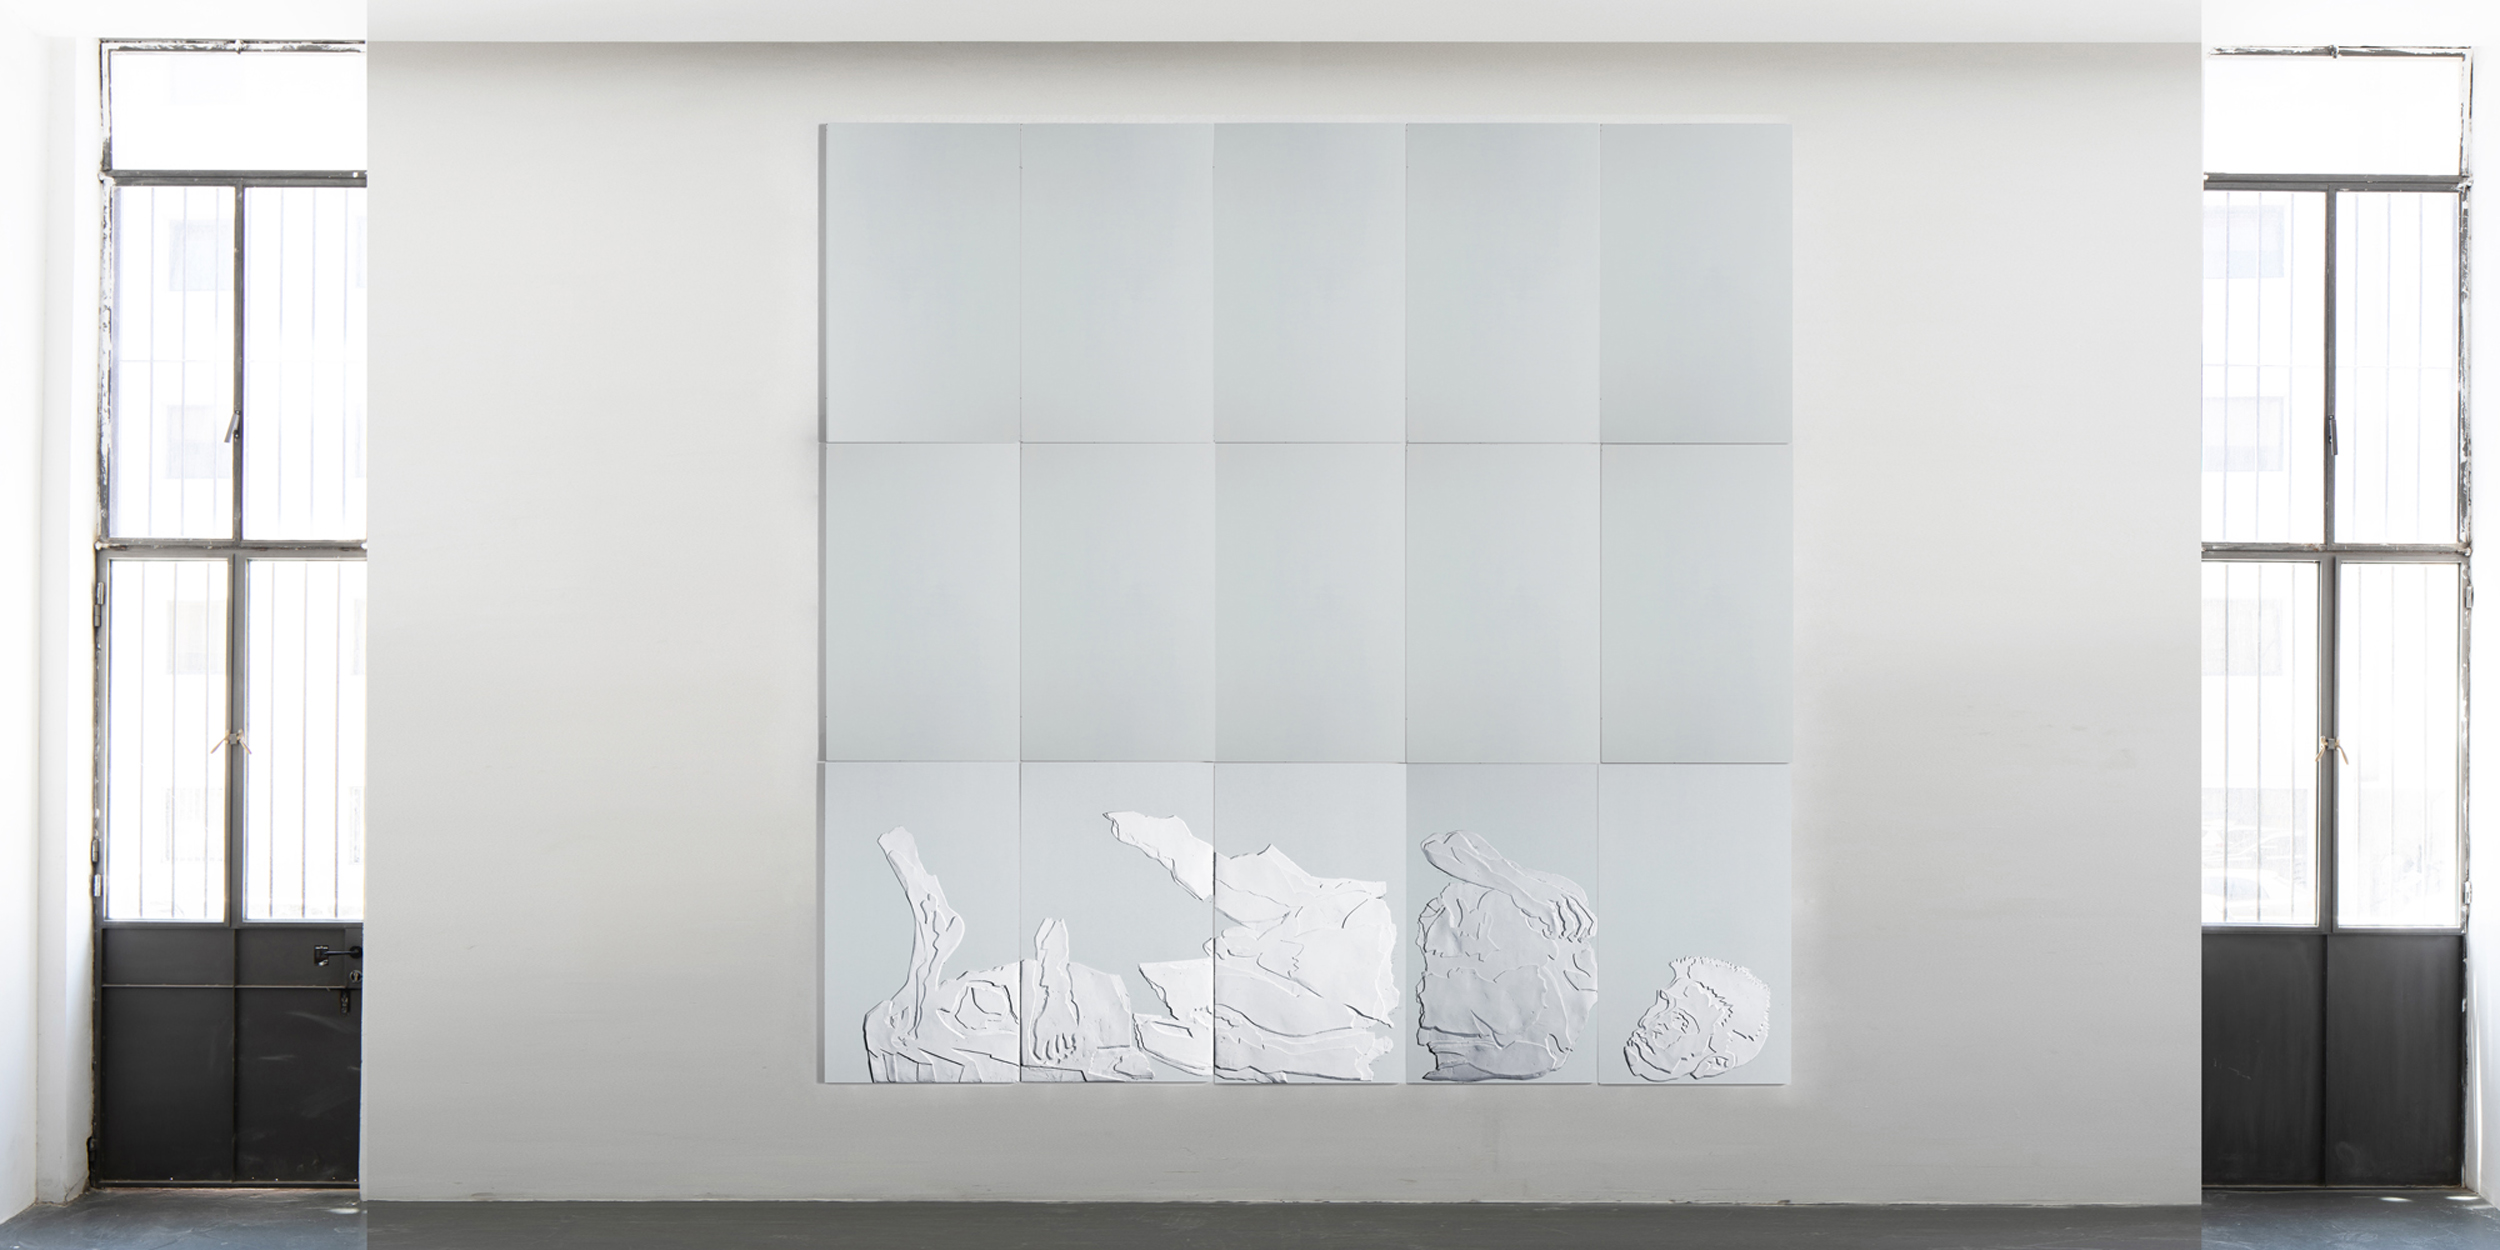 Yonatan Ullman - 04_Yonatan_Ullman_A_Proposal_For_A_Monument_To_Myself_As_I_Wish_To_Be_Remembered_scene_04_of_04(installation_view)_2019.jpg